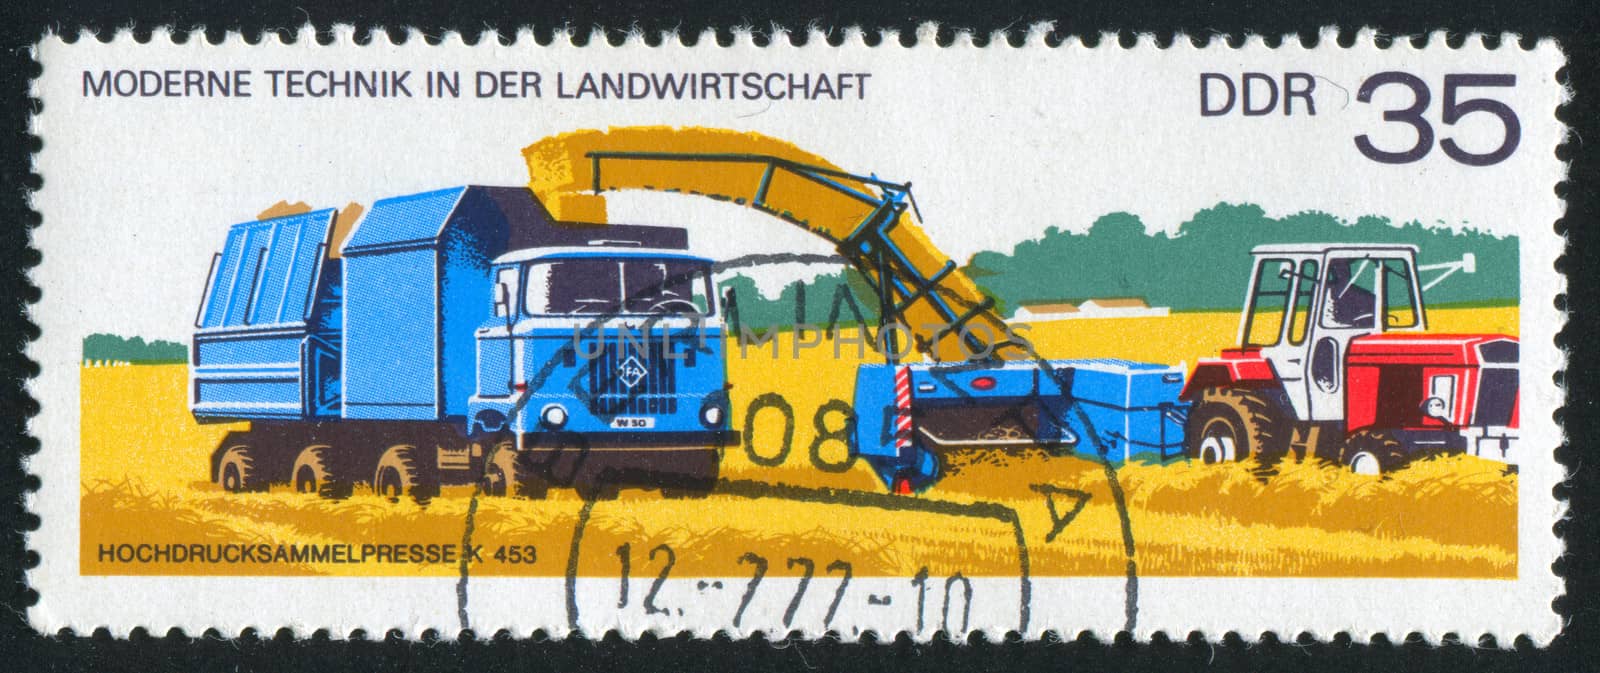 GERMANY - CIRCA 1977: stamp printed by Germany, shows High-pressure harvester, circa 1977